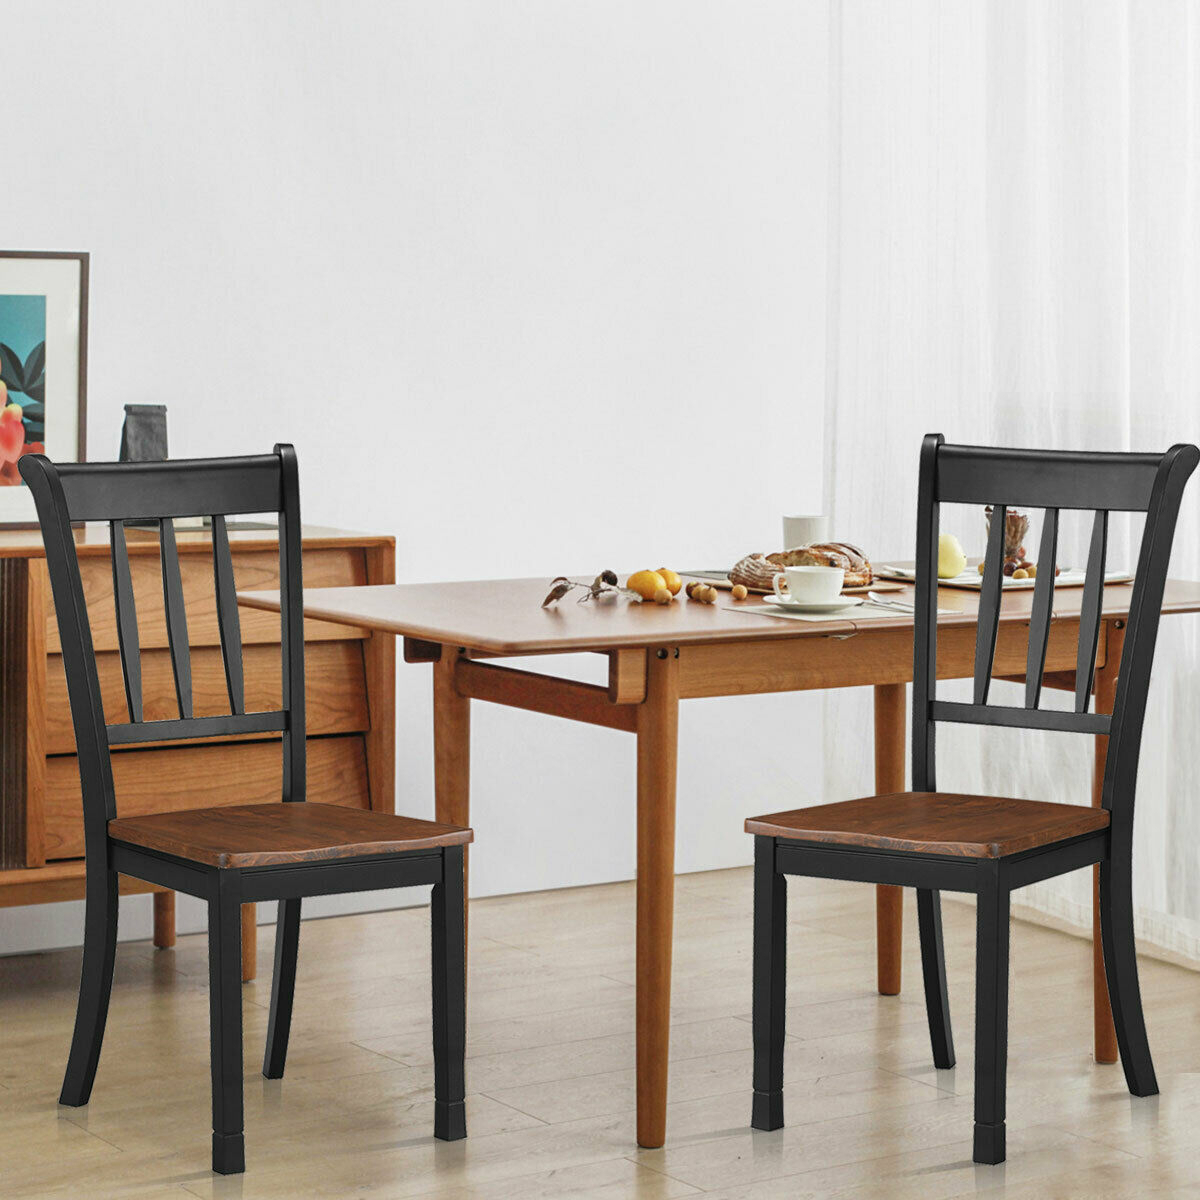 4PCS Wooden Dining Side Chair High Back Armless Home Furniture Black